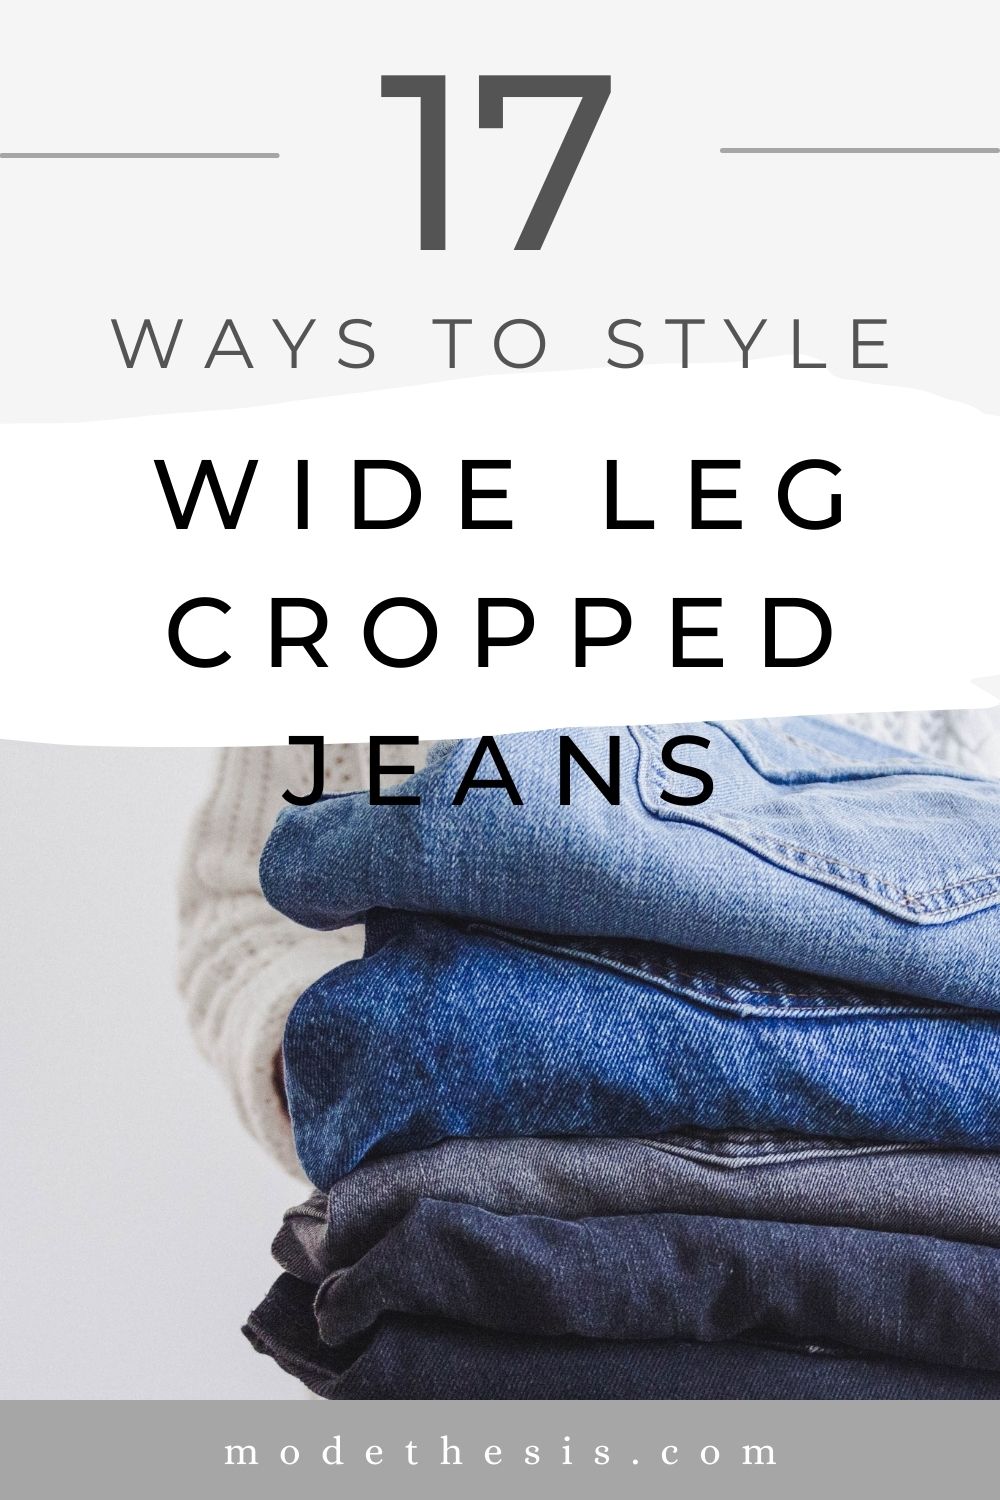 How to Wear Wide-leg Cropped Jeans: Tips & 17+ Outfit Ideas - Mode Thesis